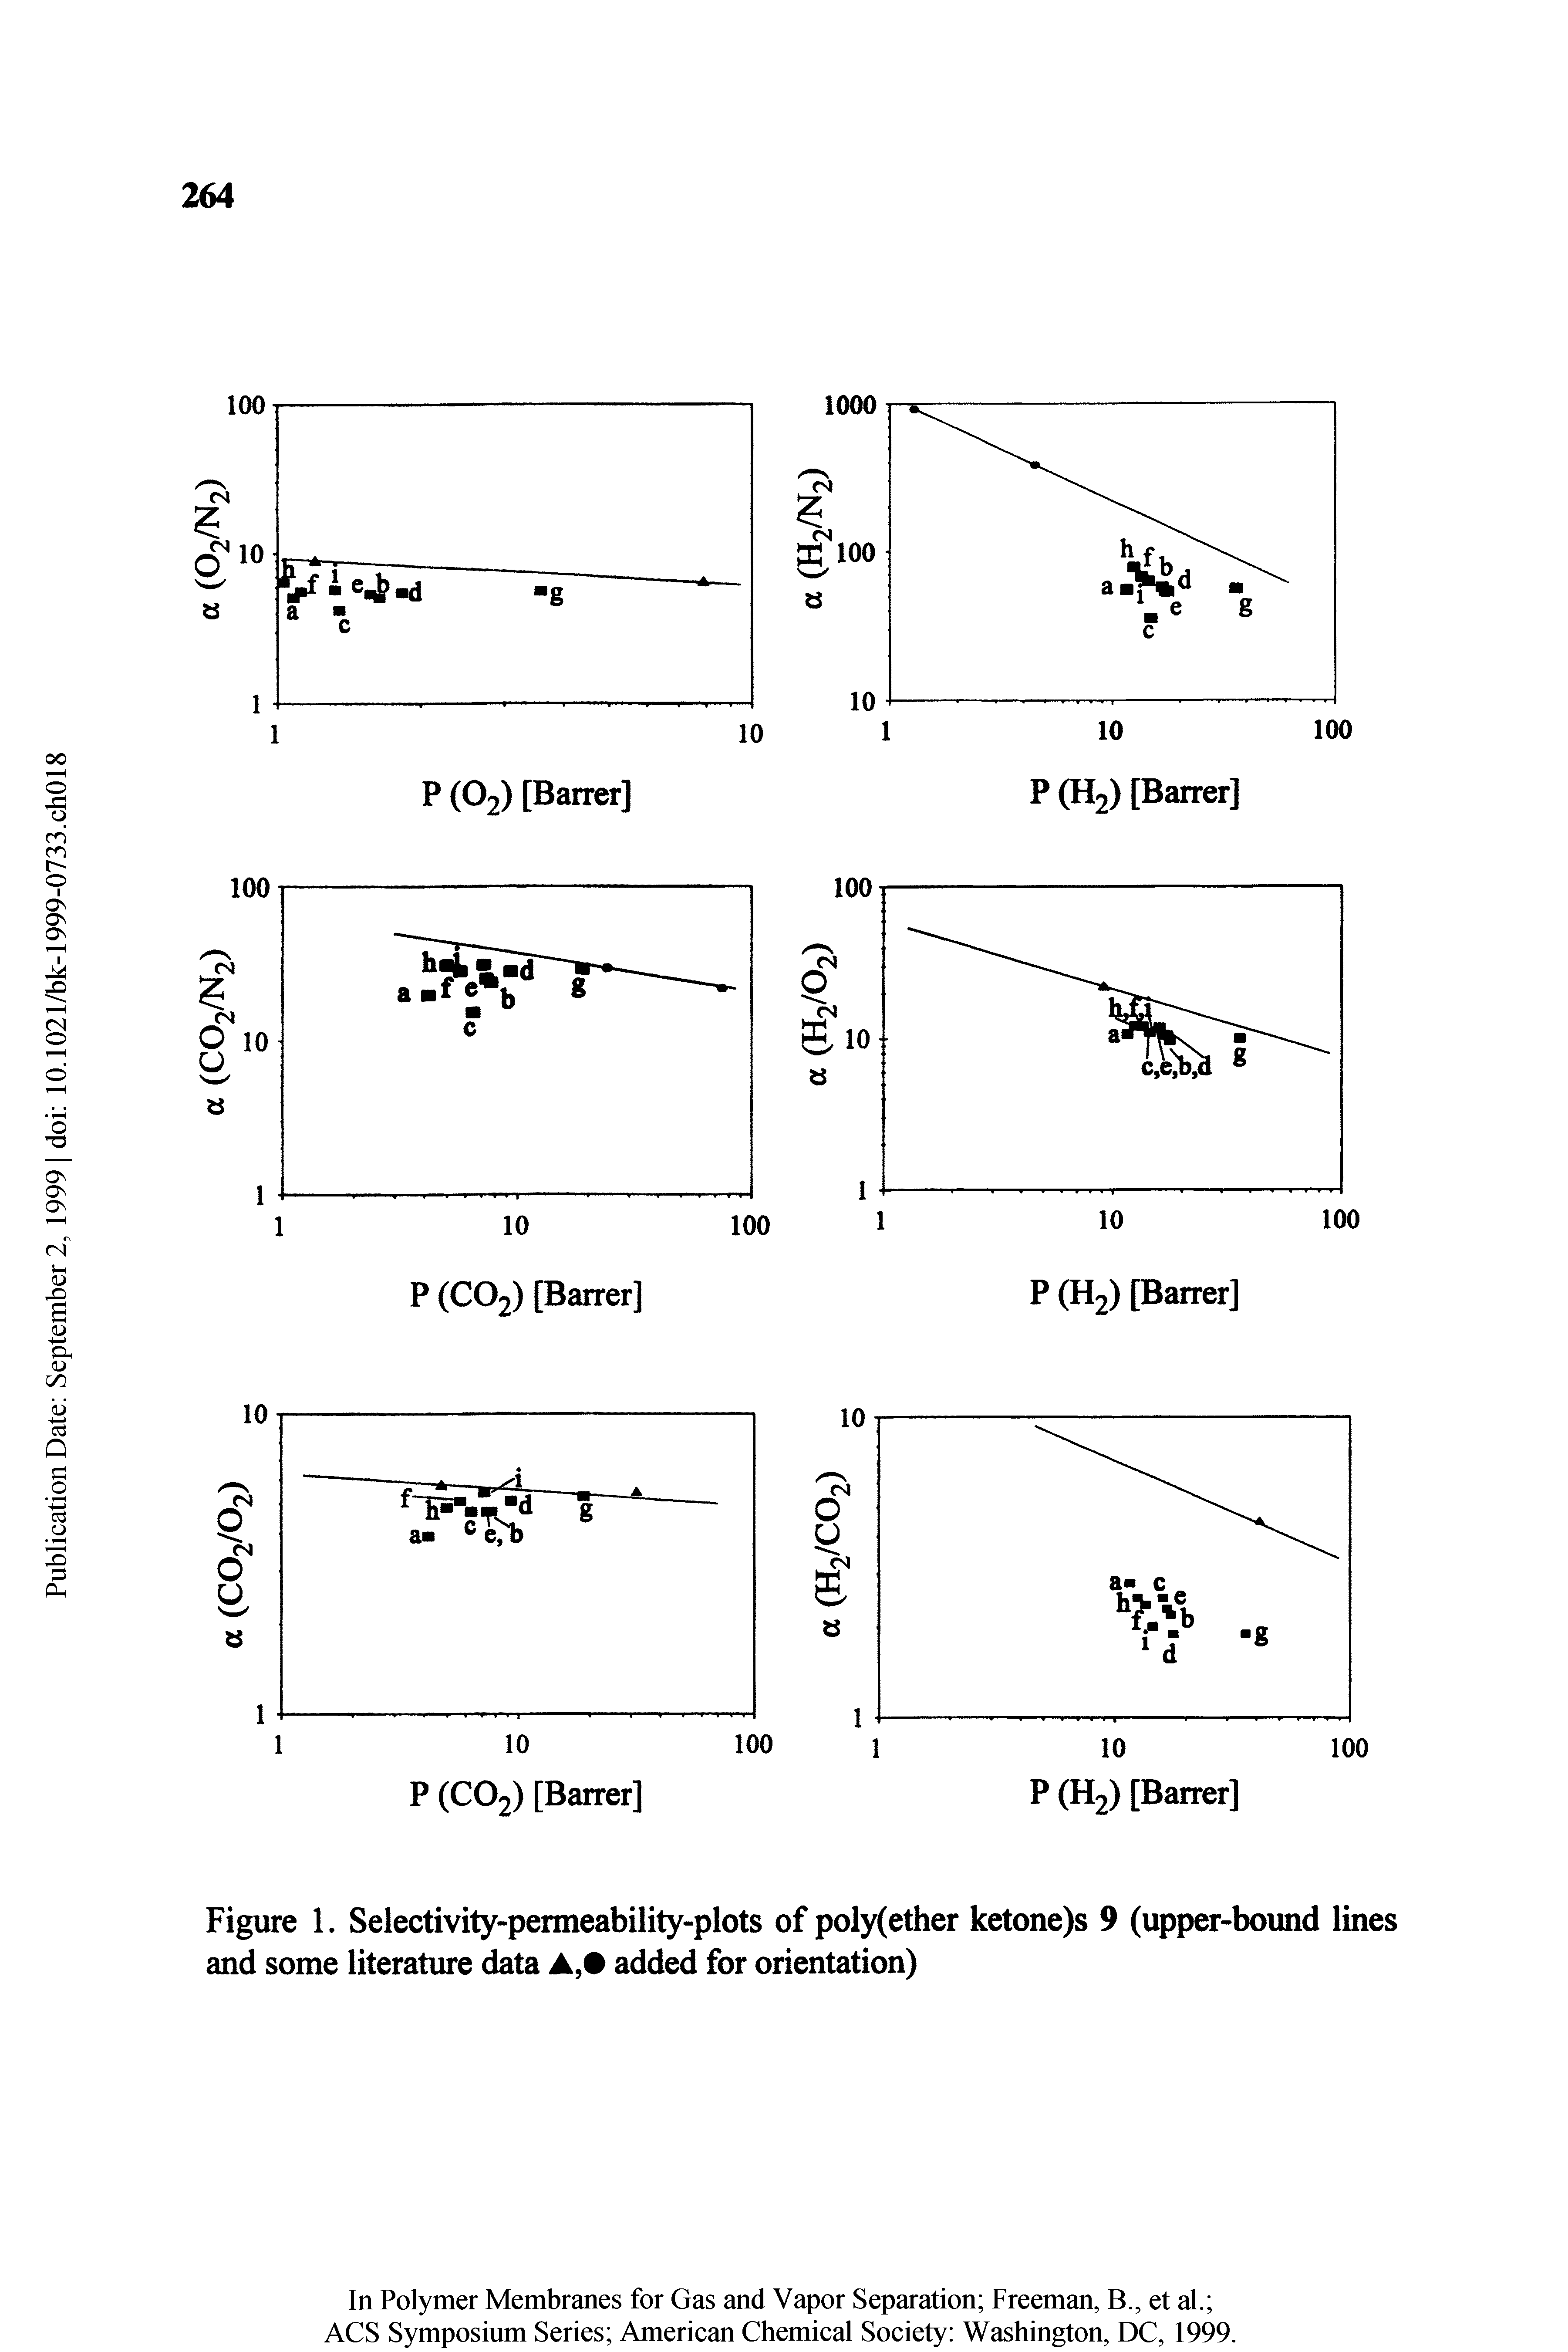 Figure 1. Selectivity-permeability-plots of poly(ether ketone)s 9 (upper-bound lines and some literature data added for orientation)...